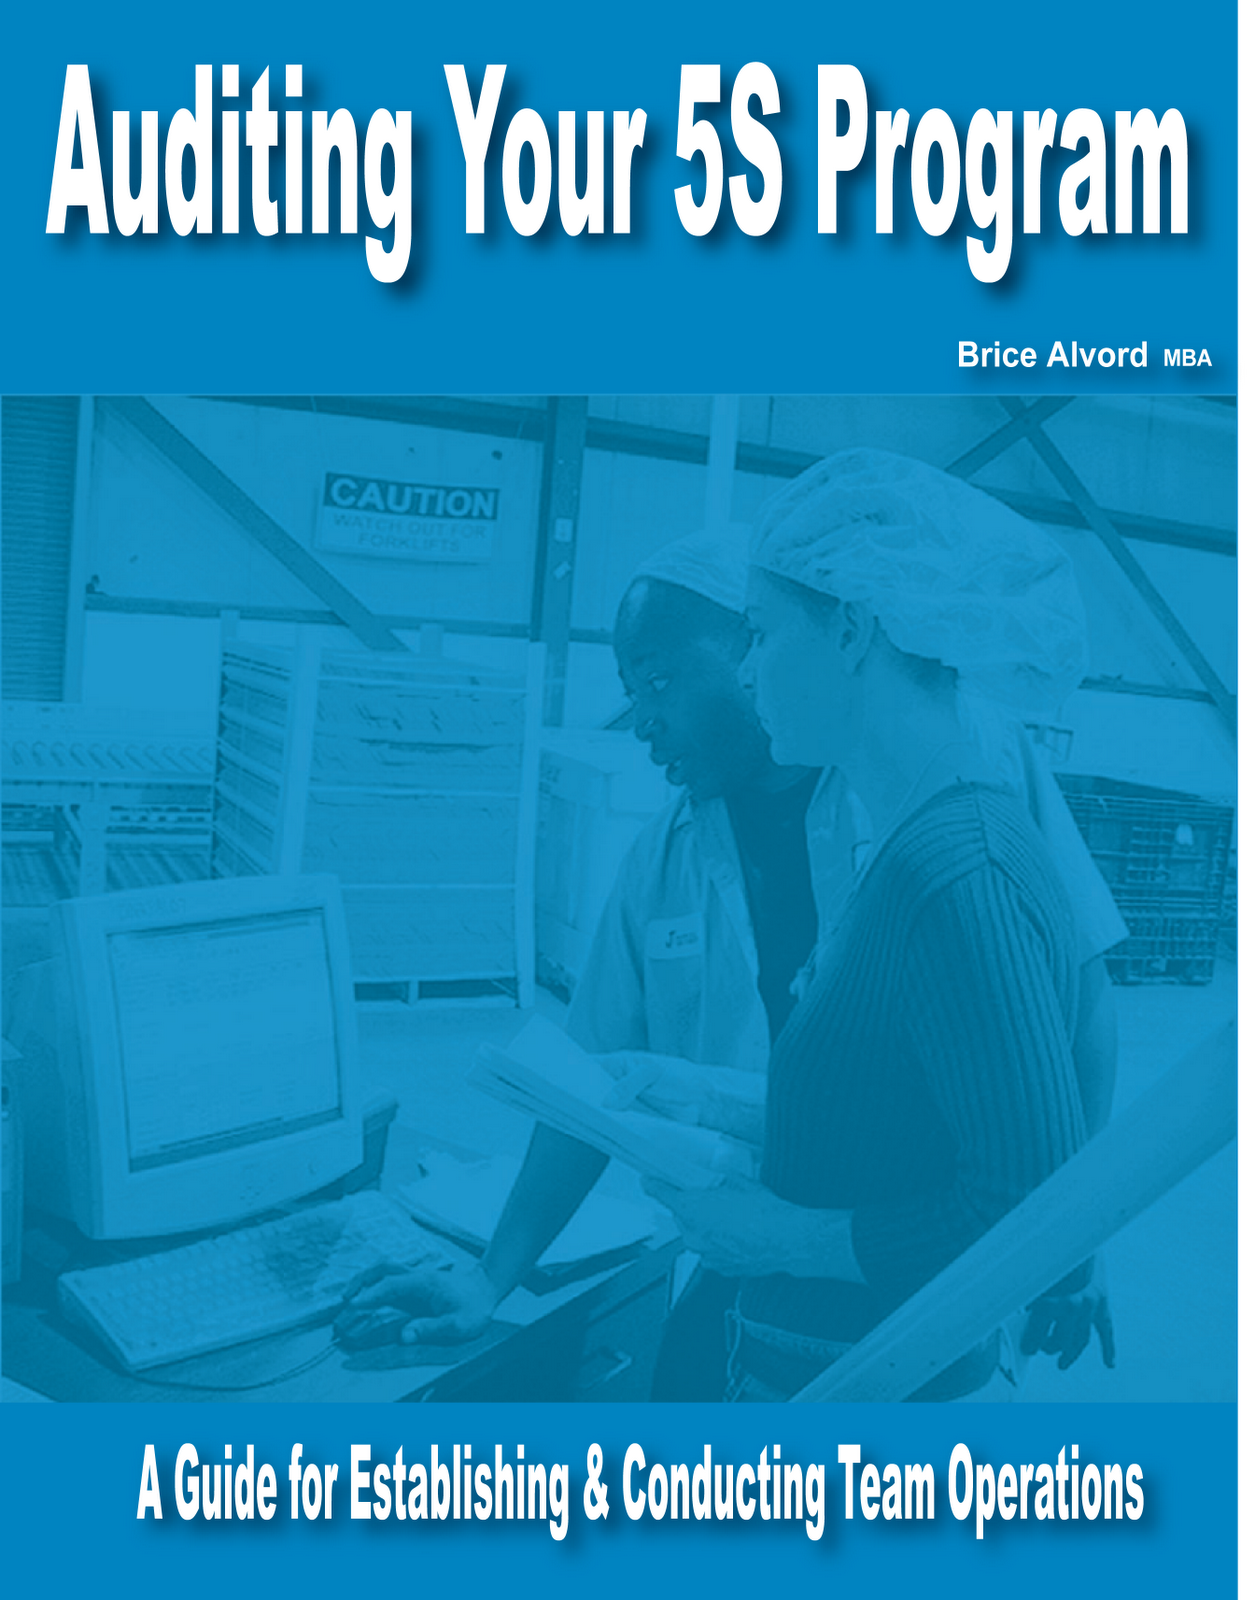 improving-your-workplace-auditing-your-5s-program